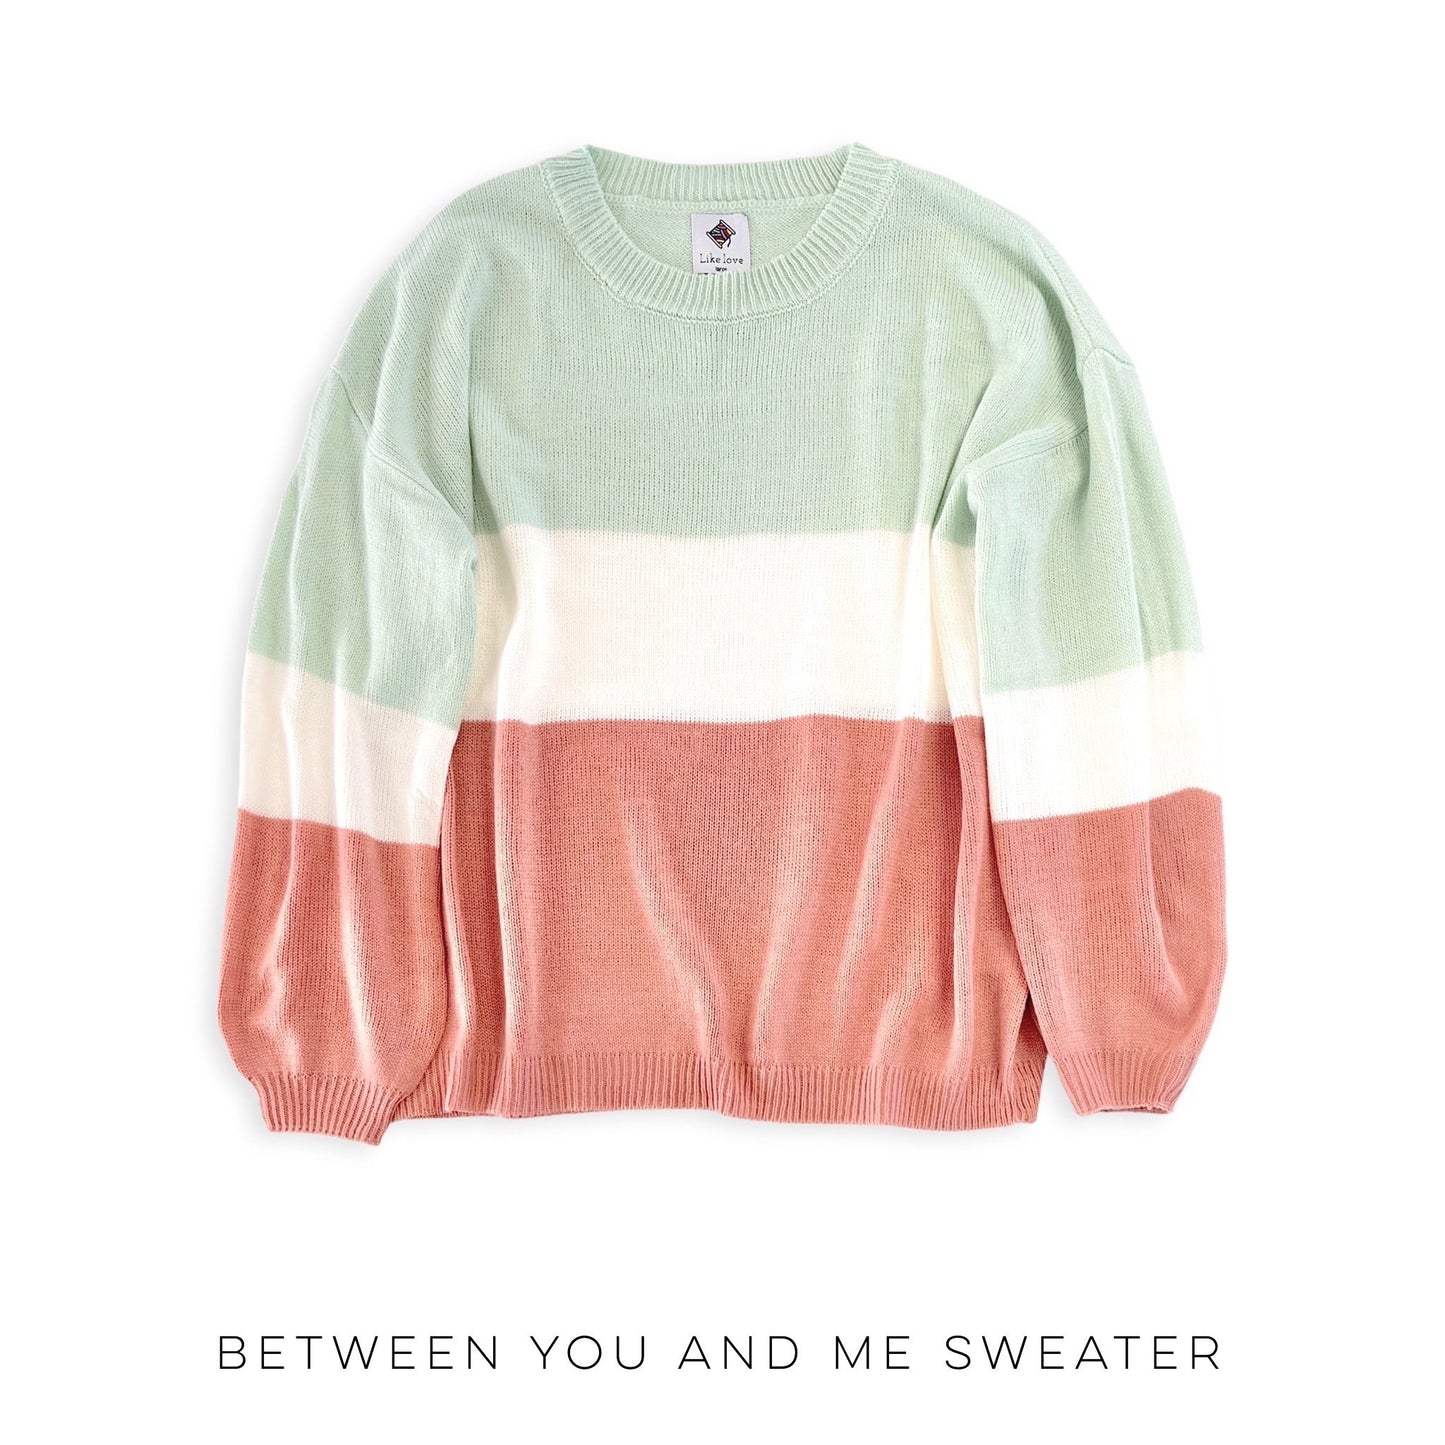 Between You and Me Sweater